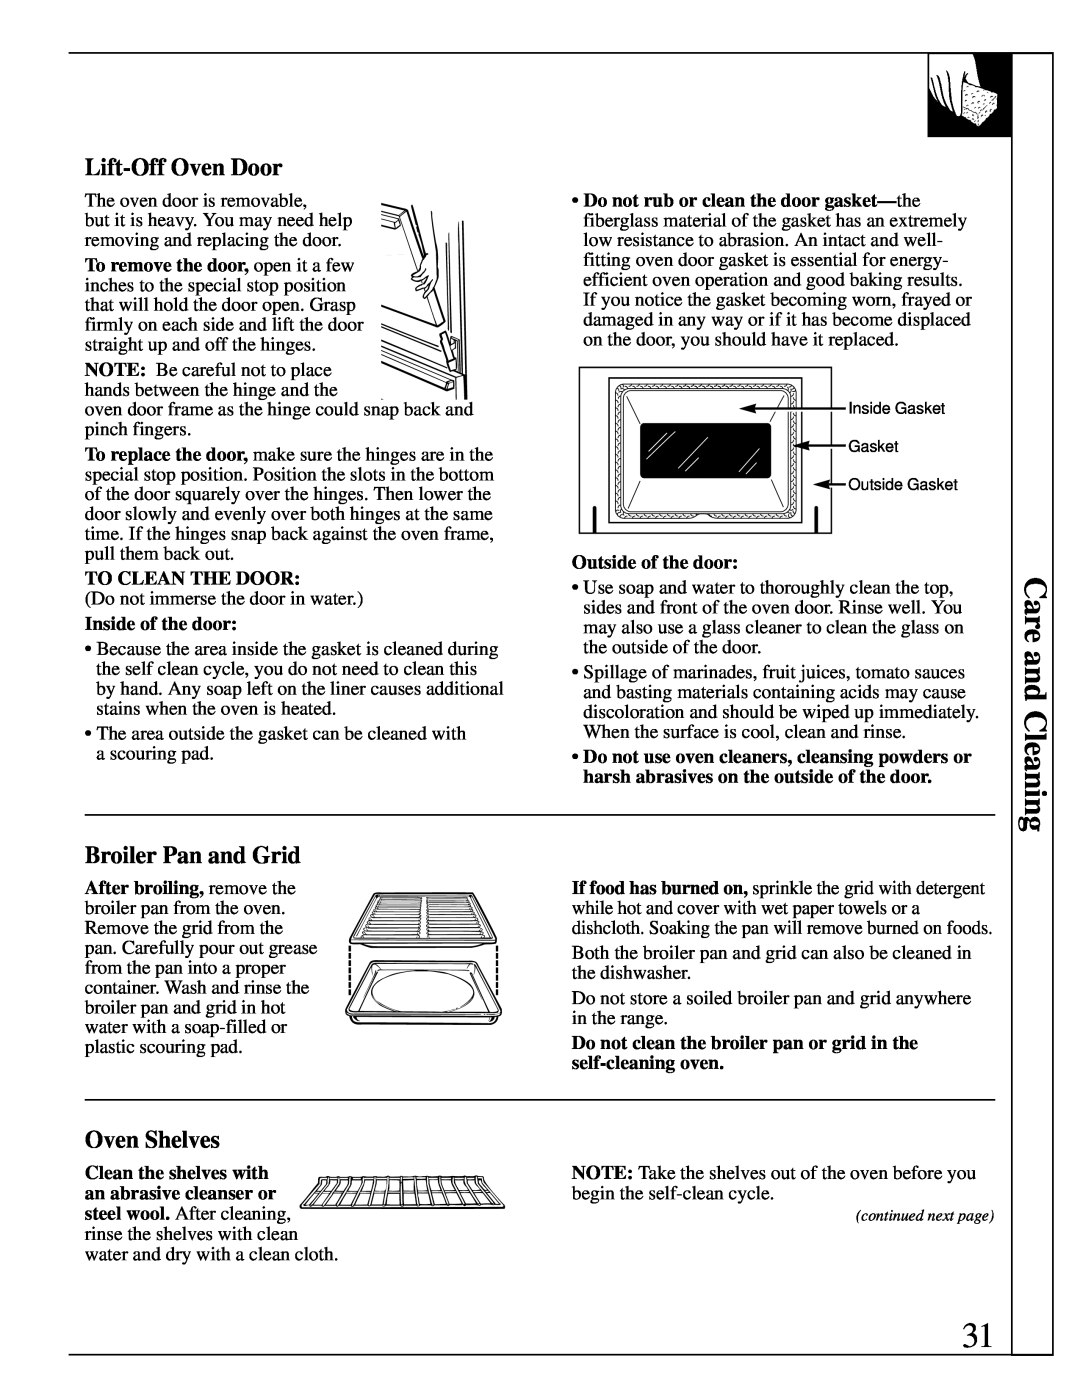 Hotpoint RGB744 installation instructions Lift-OffOven Door, Broiler Pan and Grid, Care and Cleaning, Oven Shelves 